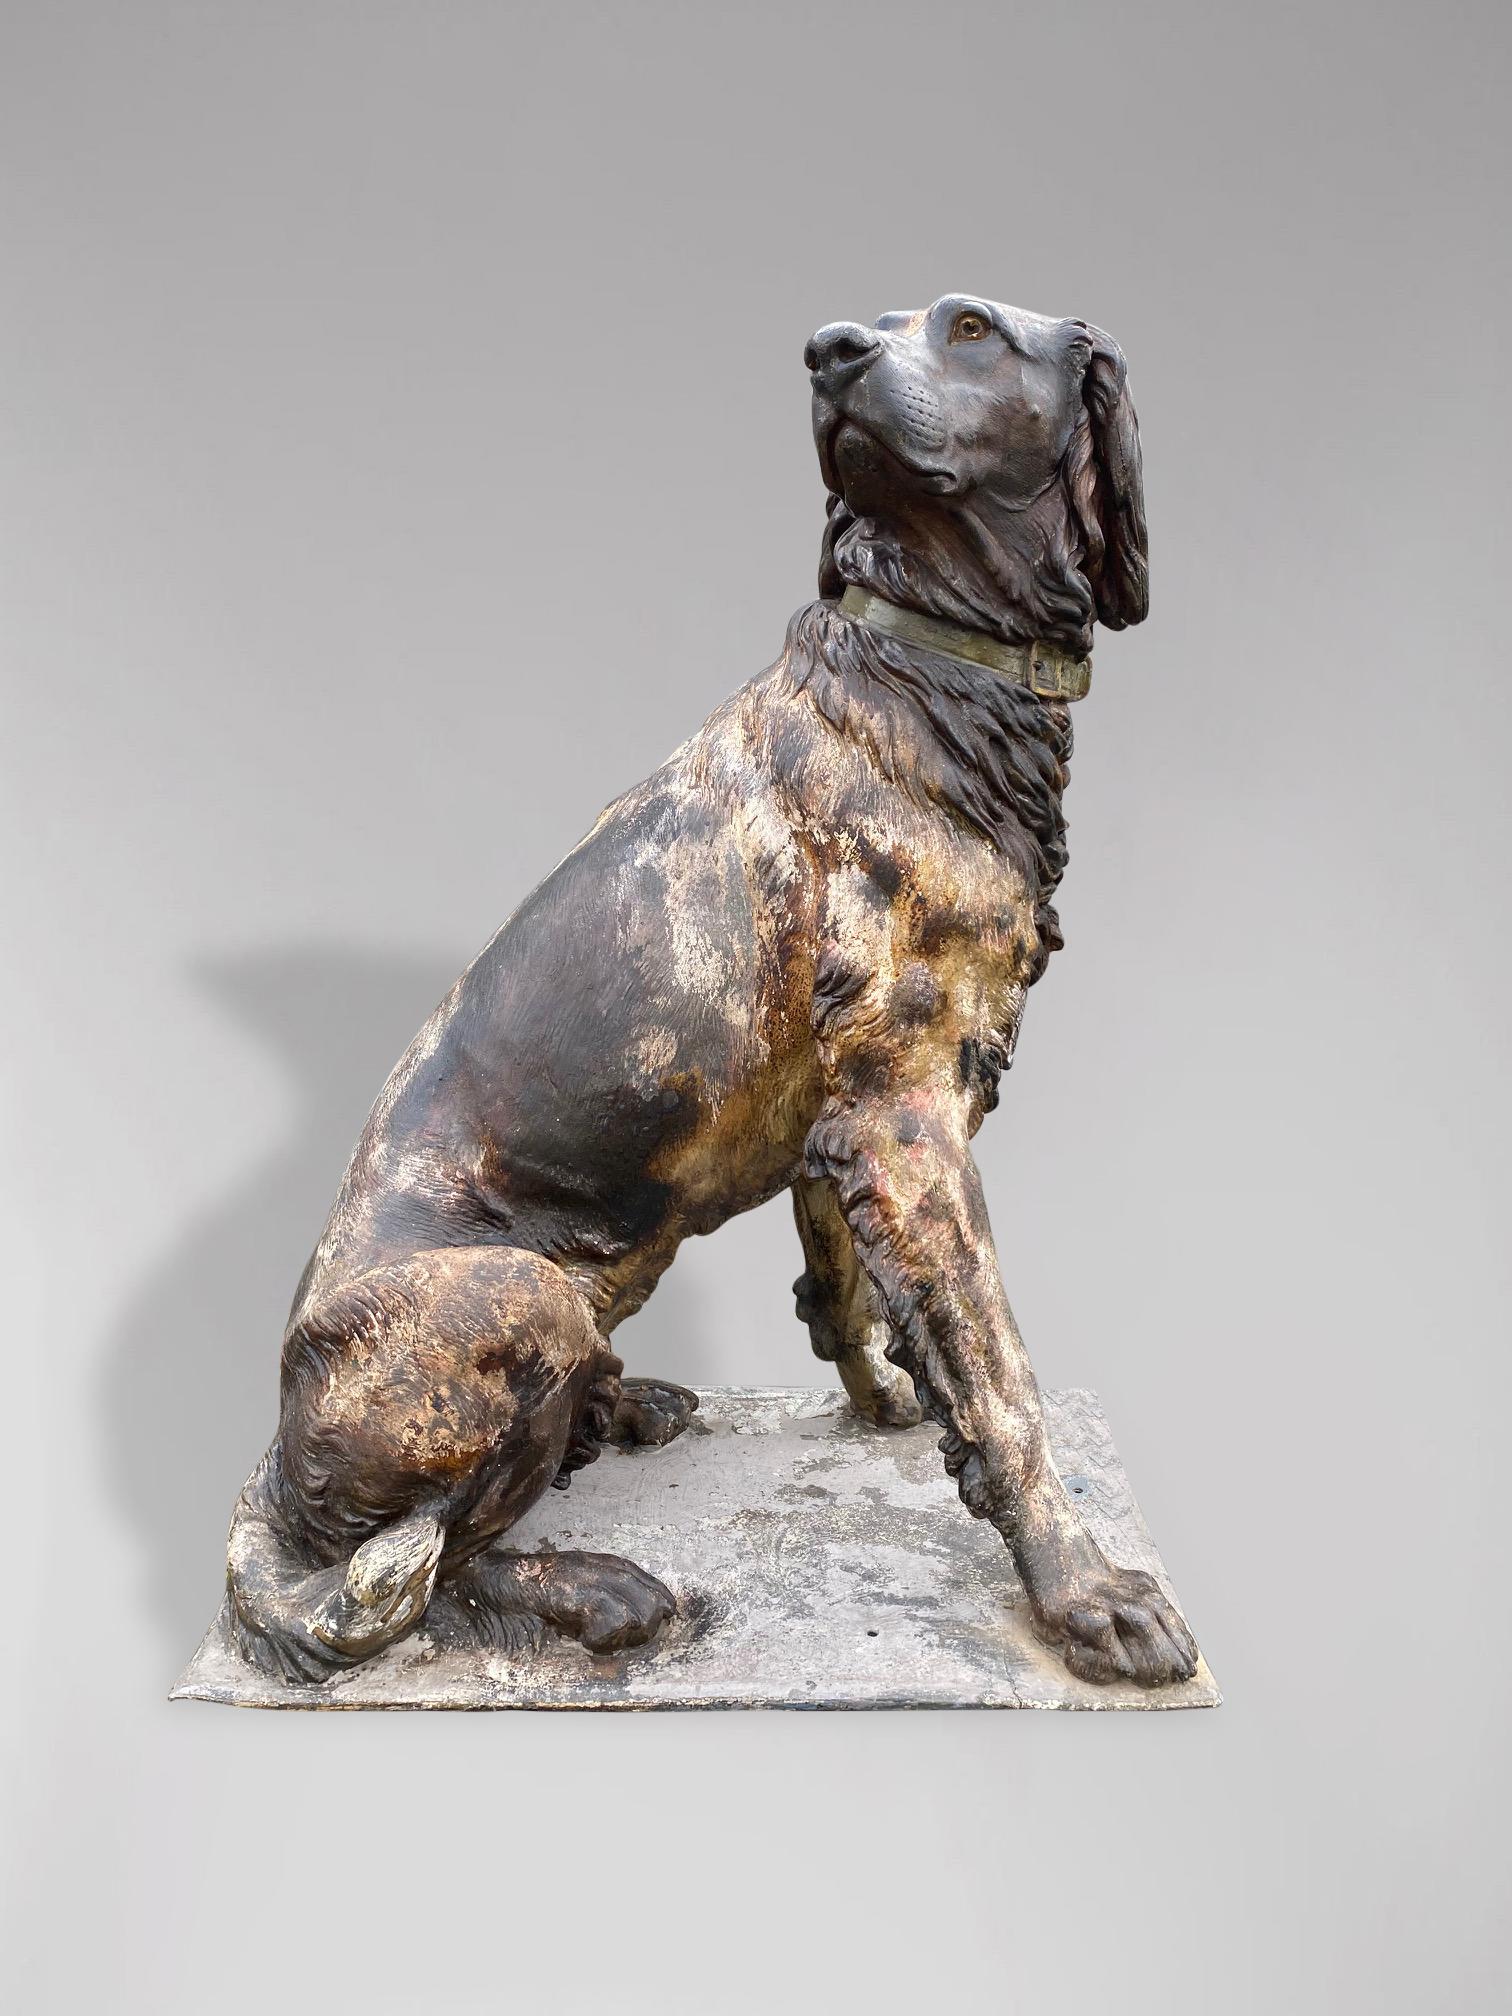 A stunning early 20th century life size cast iron statue of a Spaniel or Munster hunting dog. A very handsome statue, sitting on a plinth base, fully three dimensional and looks good from all sides. German. Exceptional quality and superb